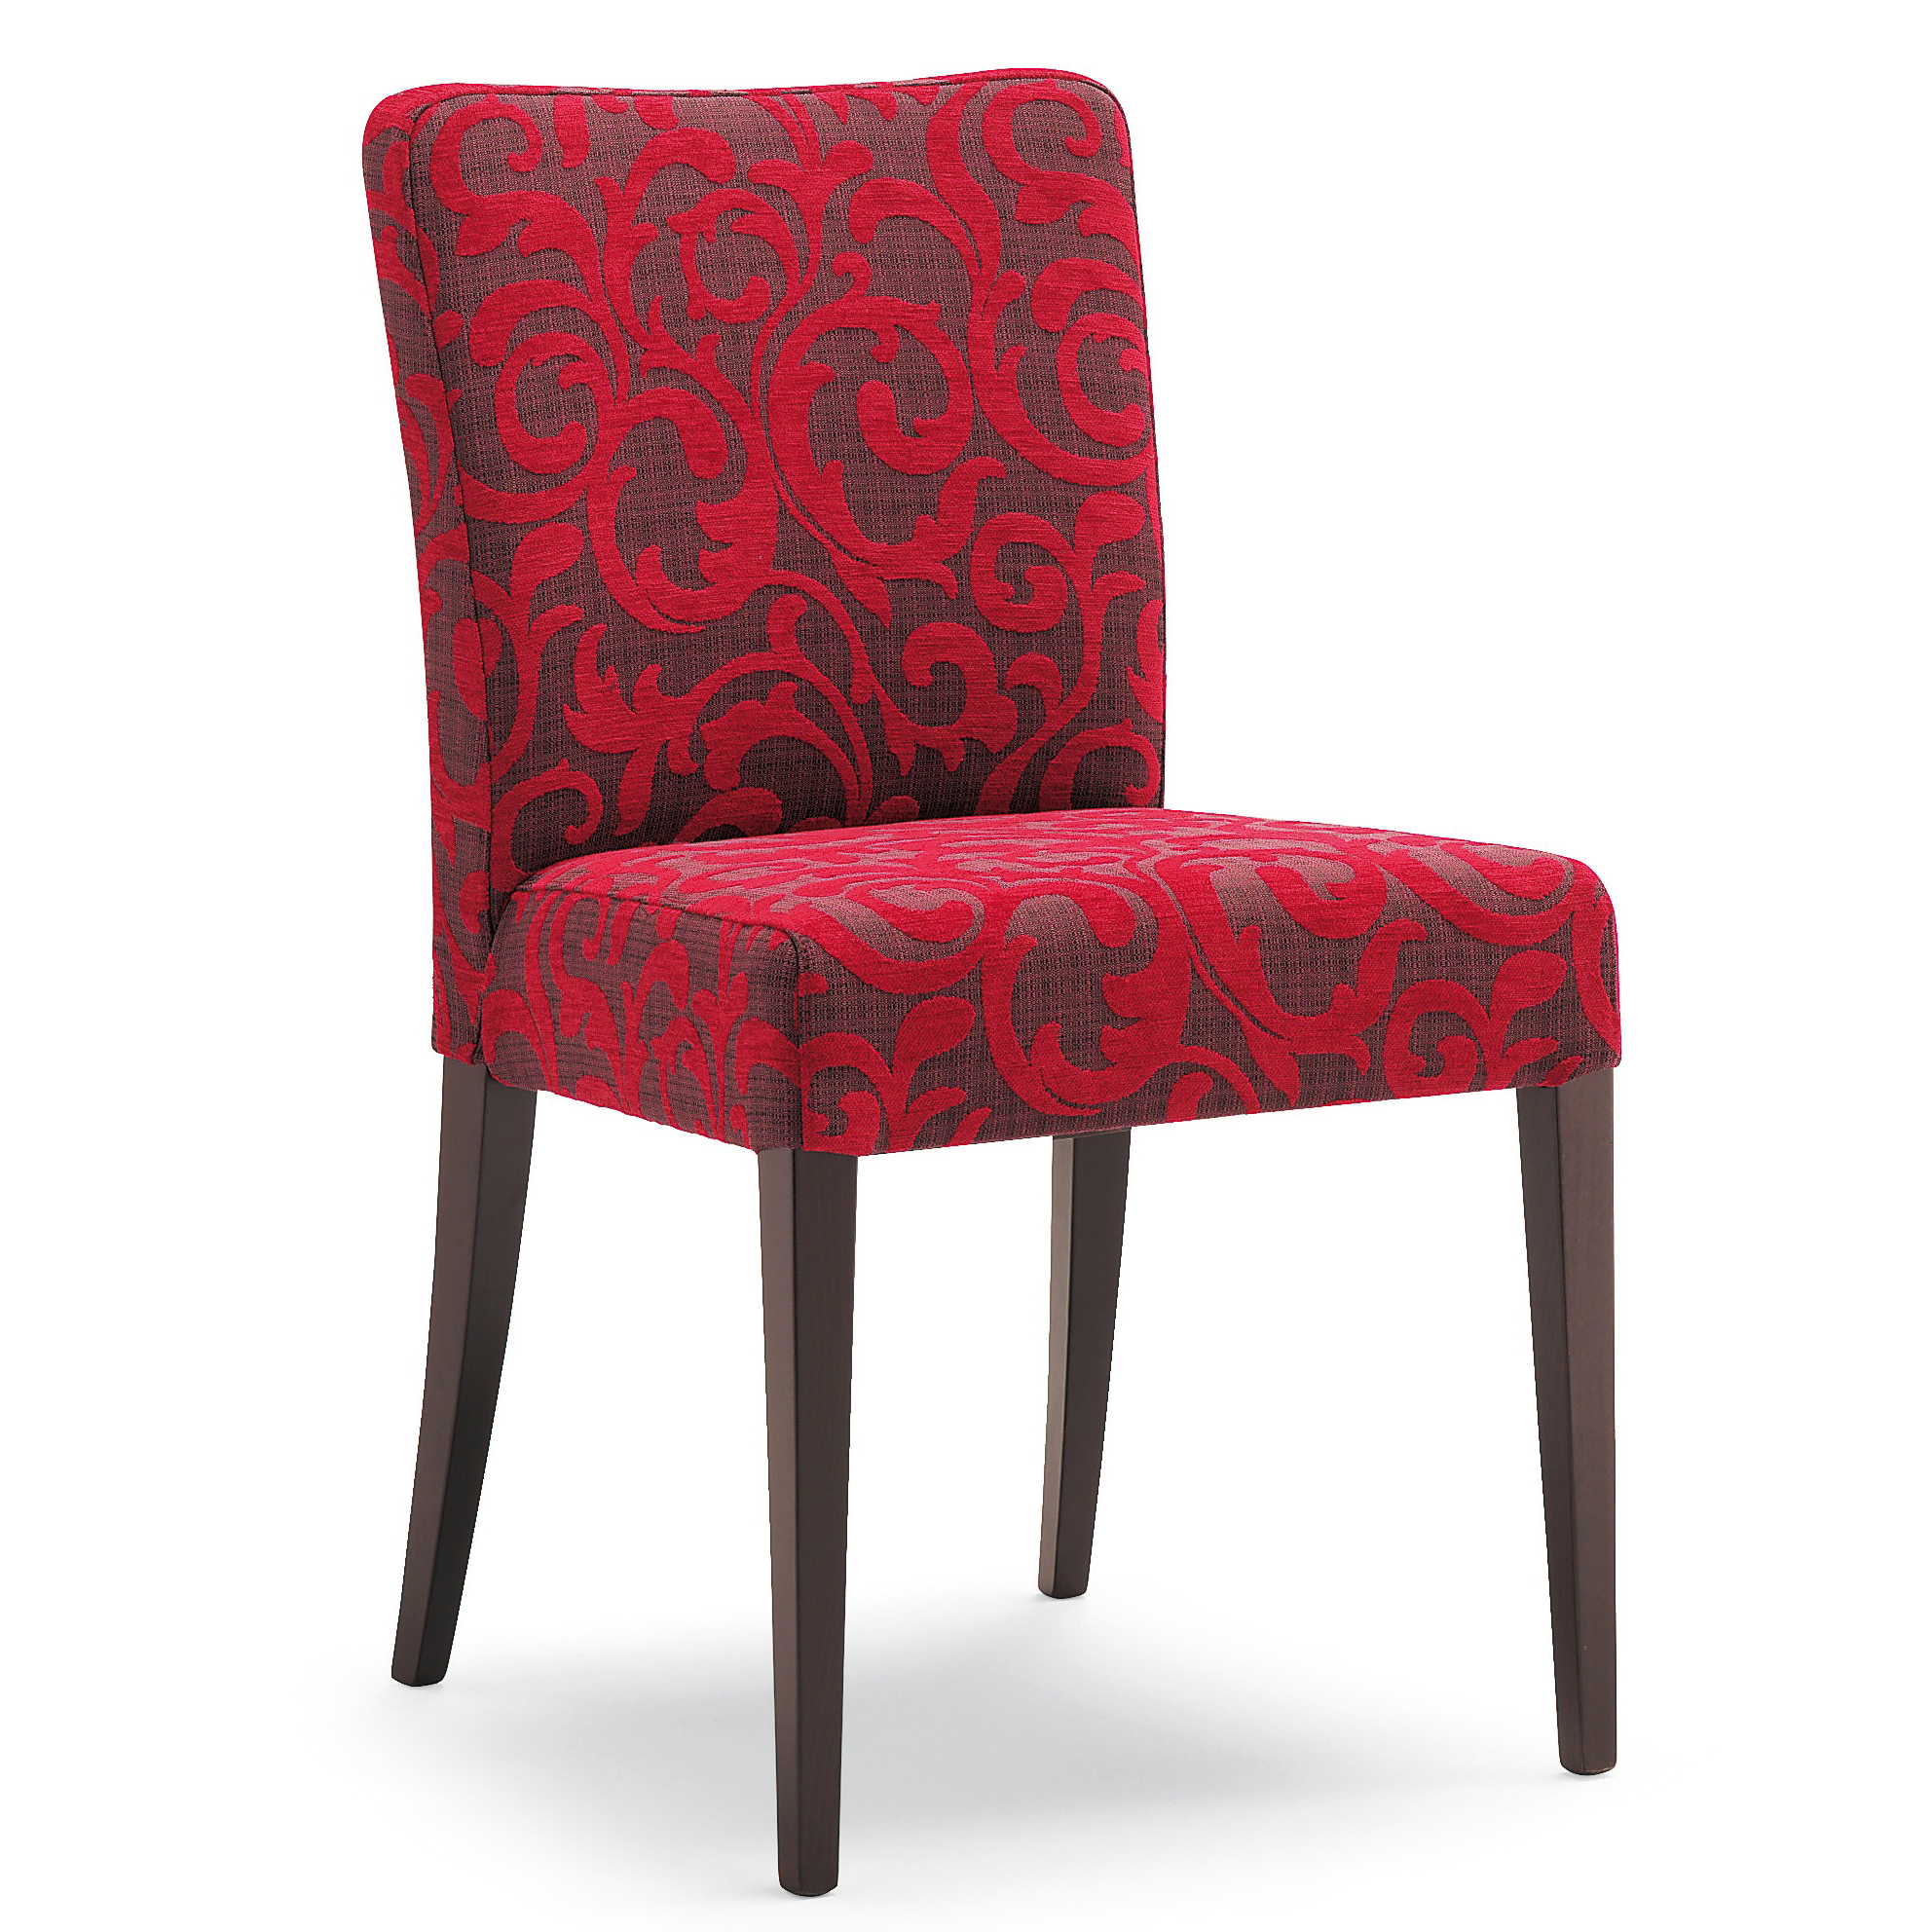 Red patterned chair